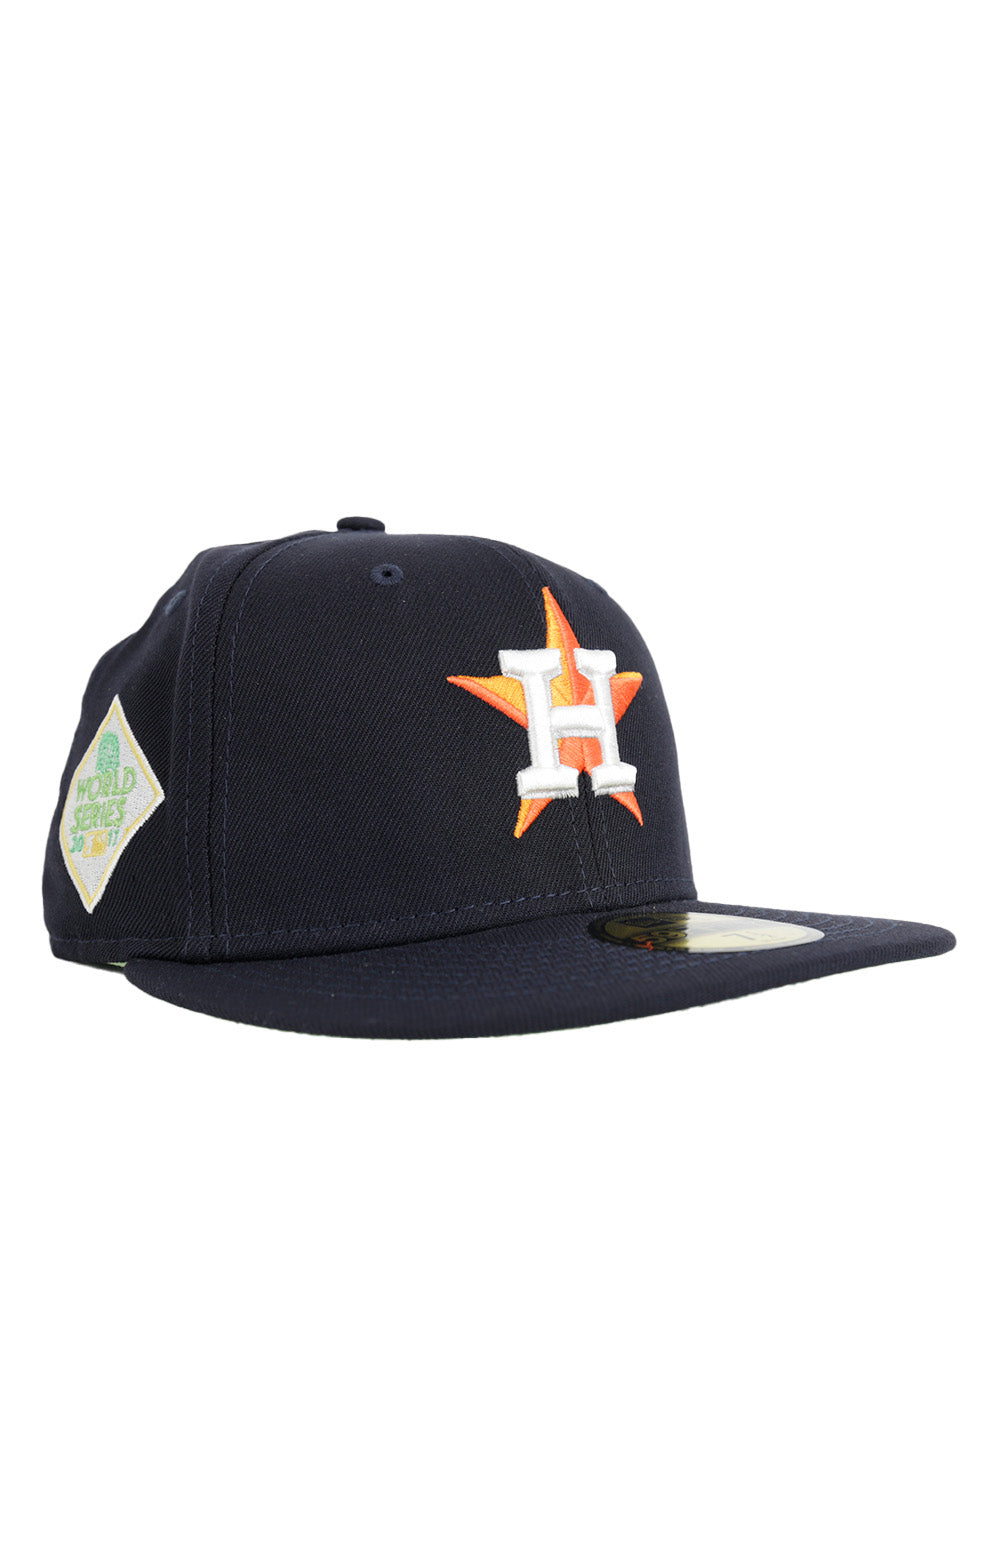 Houston Astros Citrus Pop 59FIFTY Fitted Hat